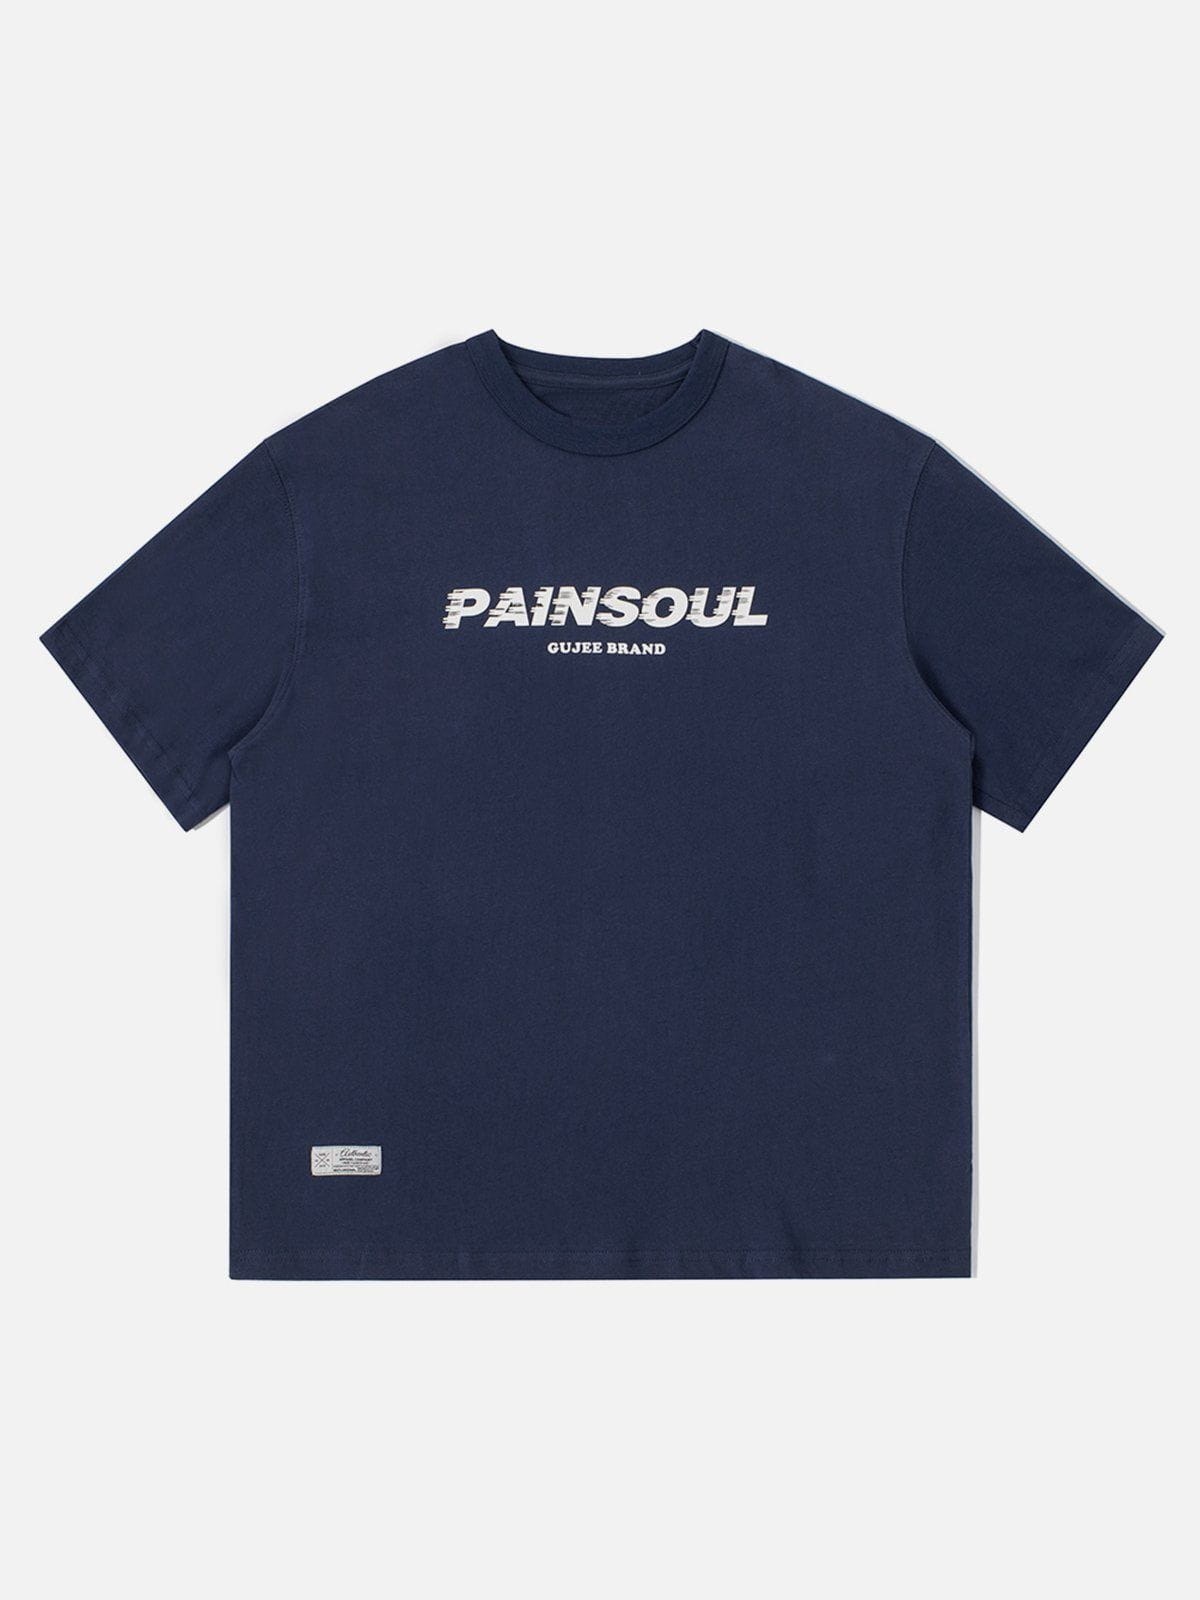 Sneakerland™ - PAINSOUL Print Cotton Tee